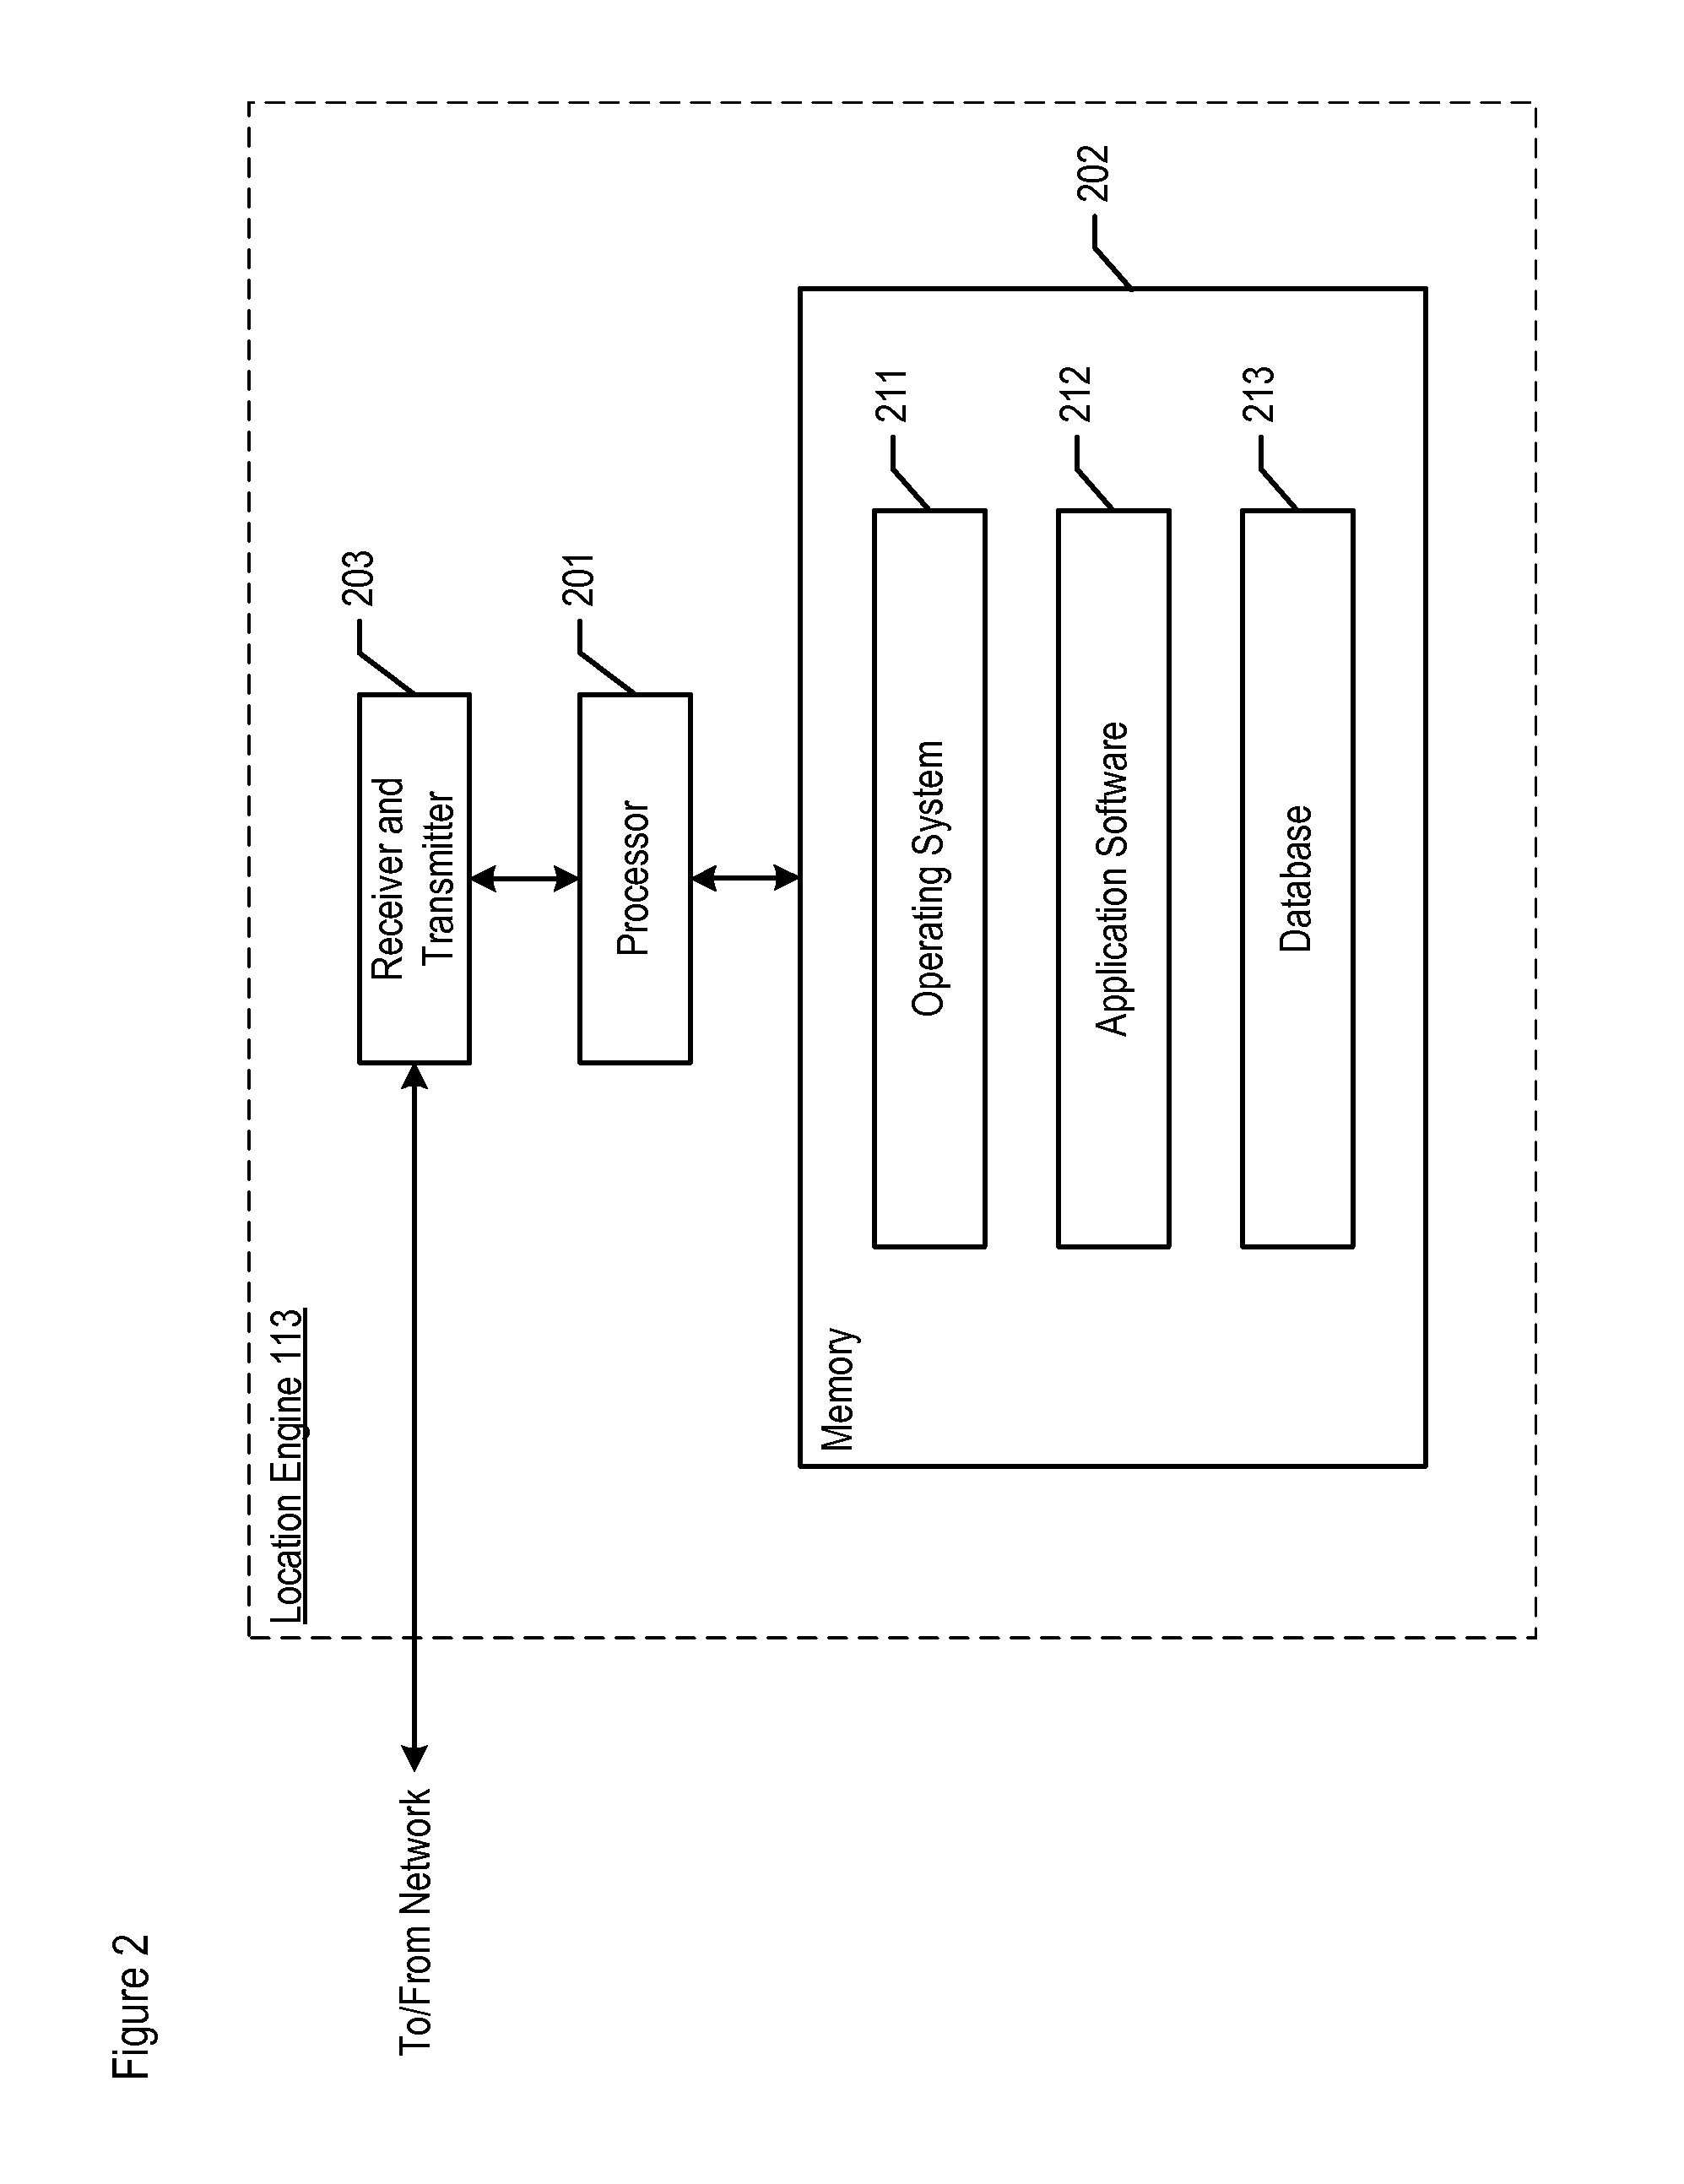 Indoor-outdoor detector for estimating the location of a wireless terminal